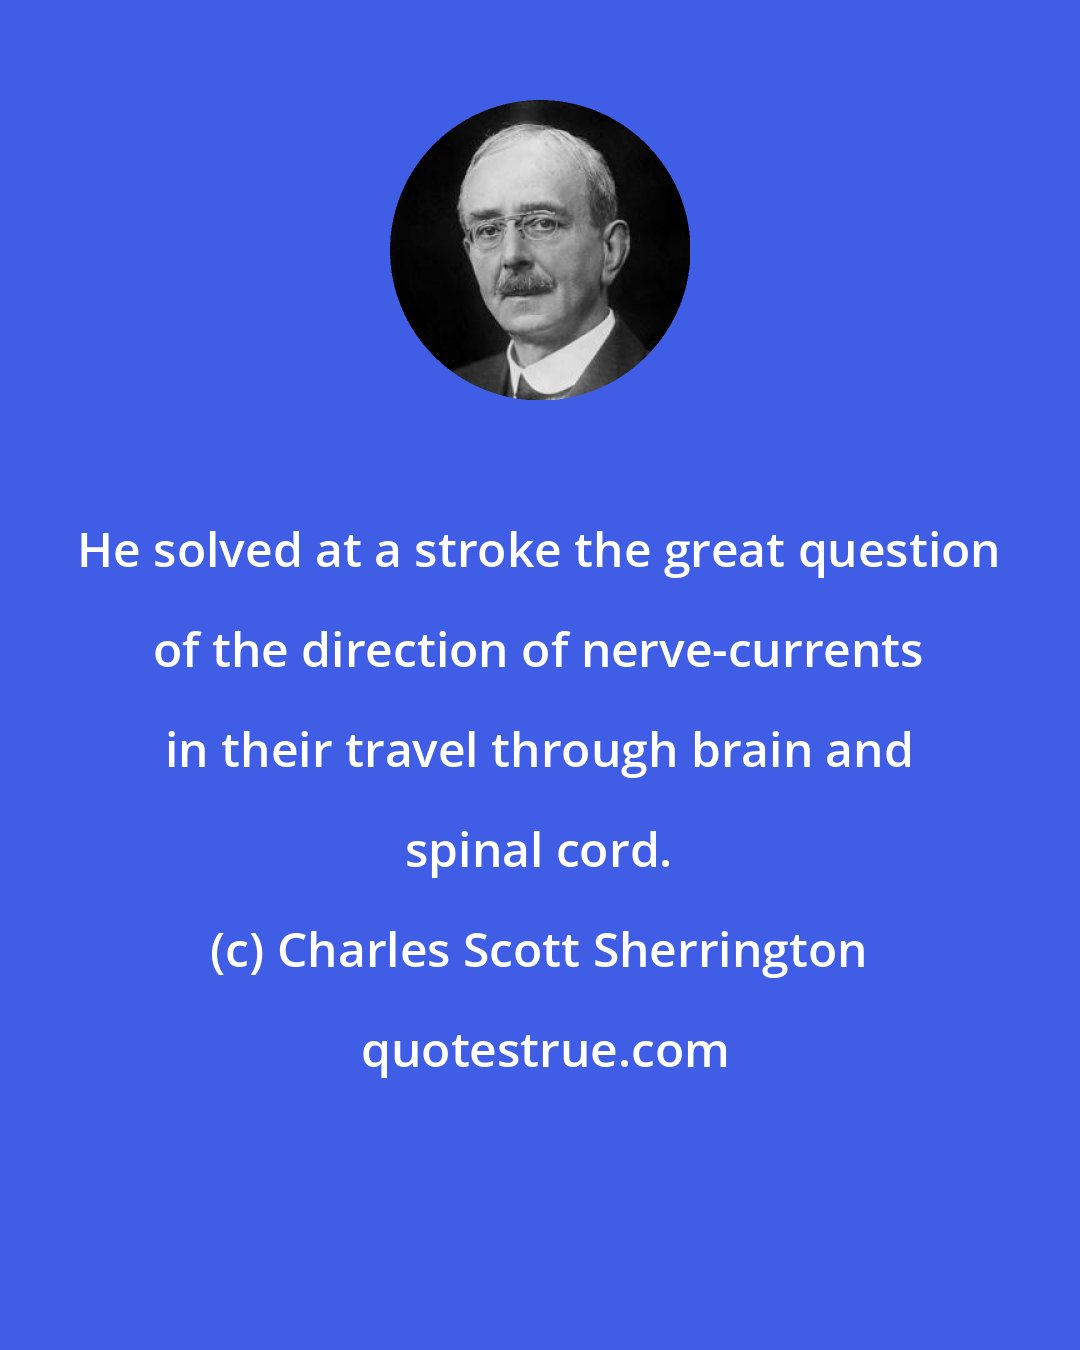 Charles Scott Sherrington: He solved at a stroke the great question of the direction of nerve-currents in their travel through brain and spinal cord.